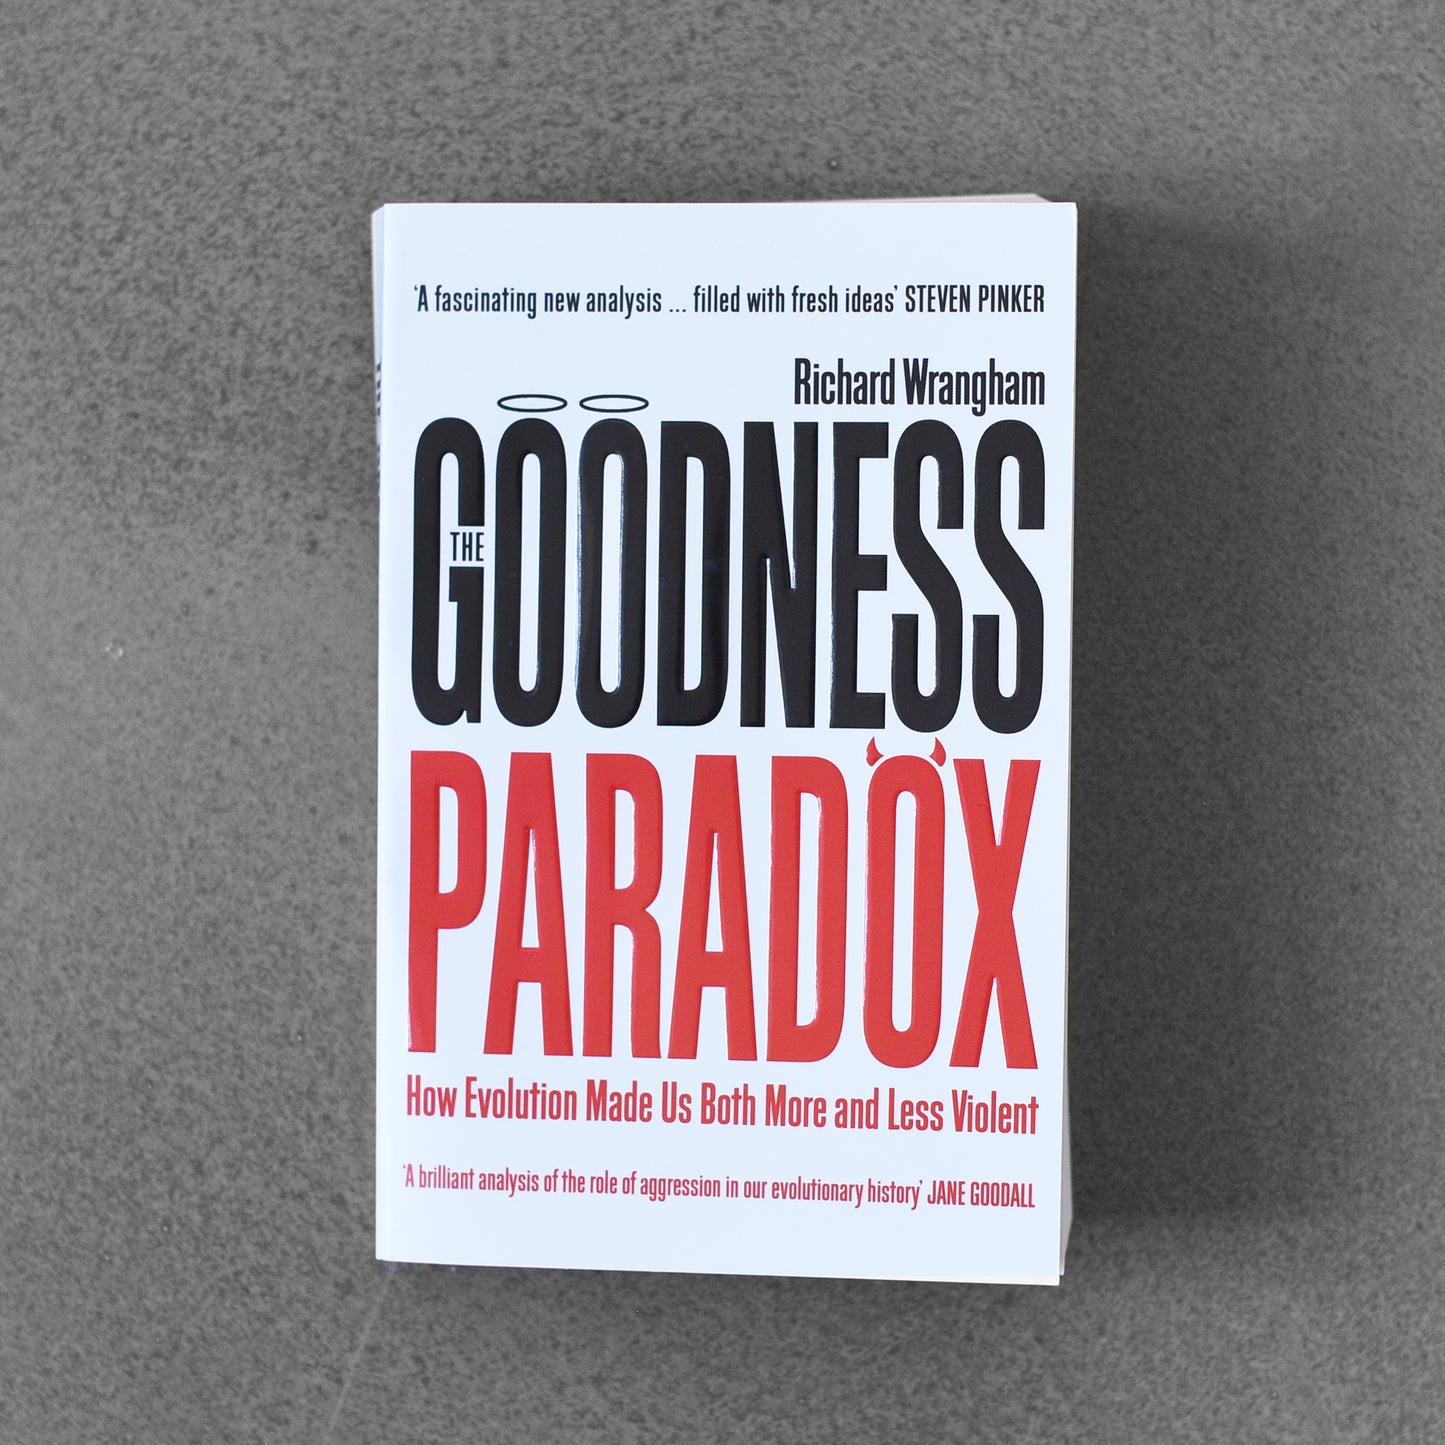 The Goodness Paradox: How Emotion Made Us Both More and Less Violent - Richard Wrangham